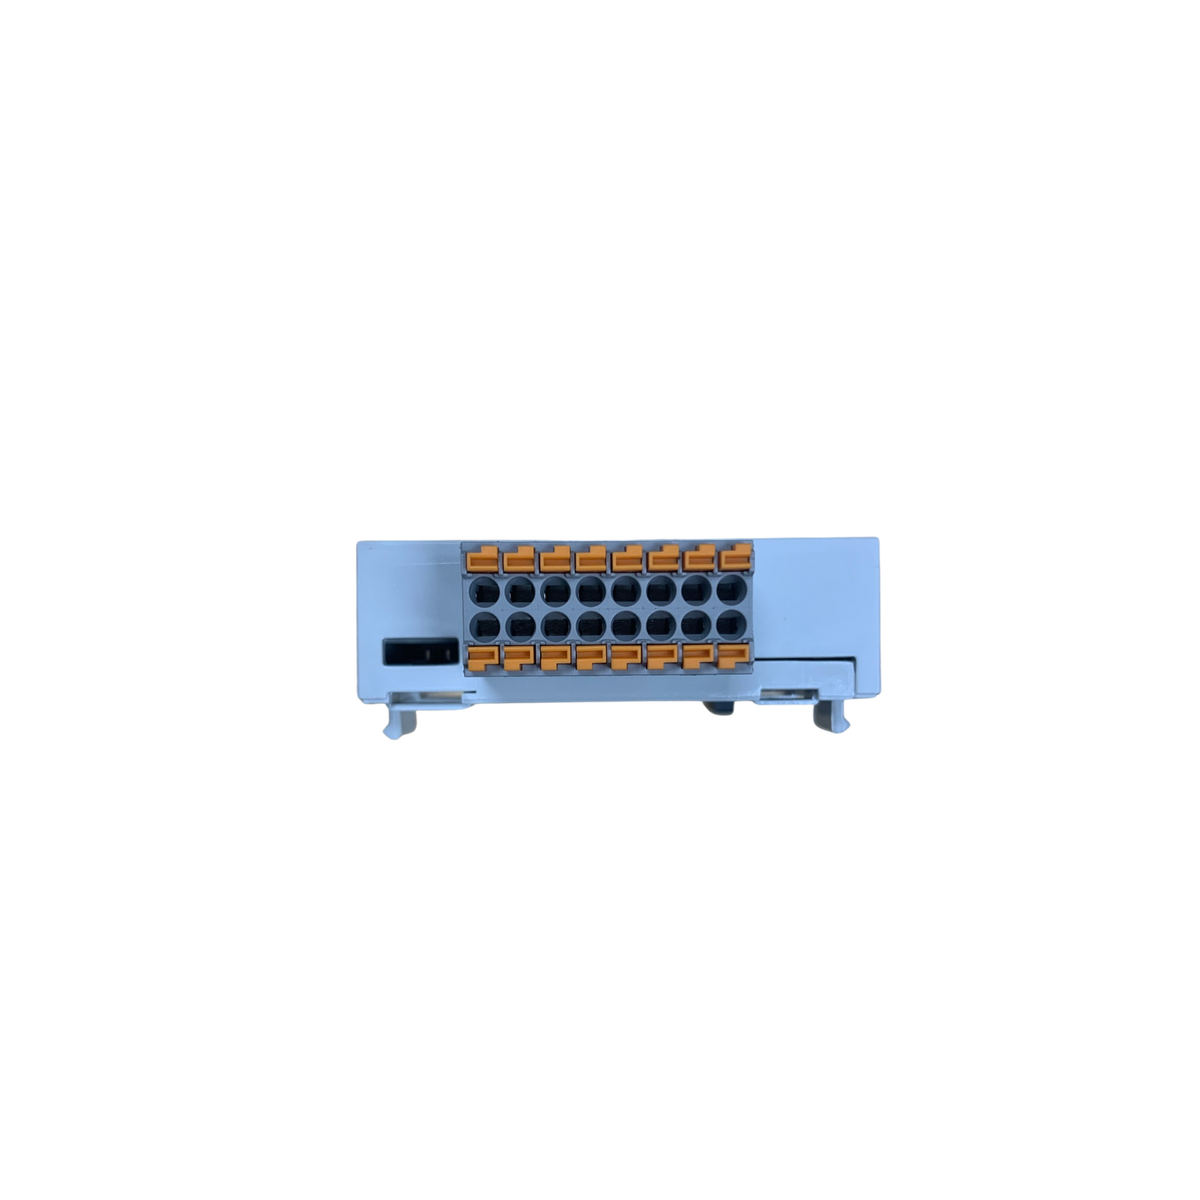 bottom view of an electronic control unit with sixteen ports